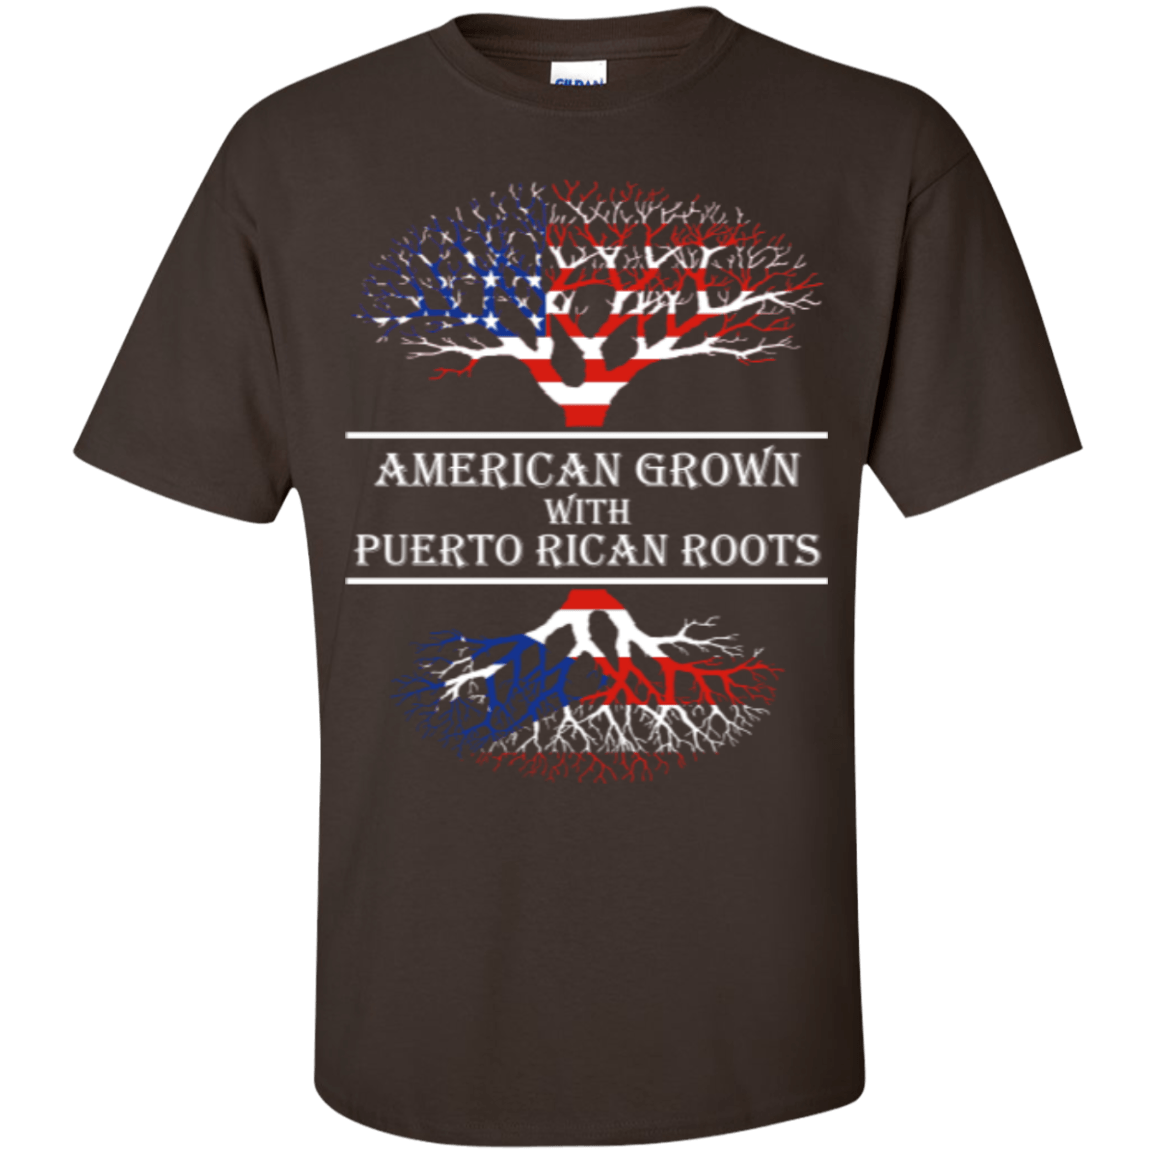 Youth Tee - American With Puerto Rican Roots - Youth